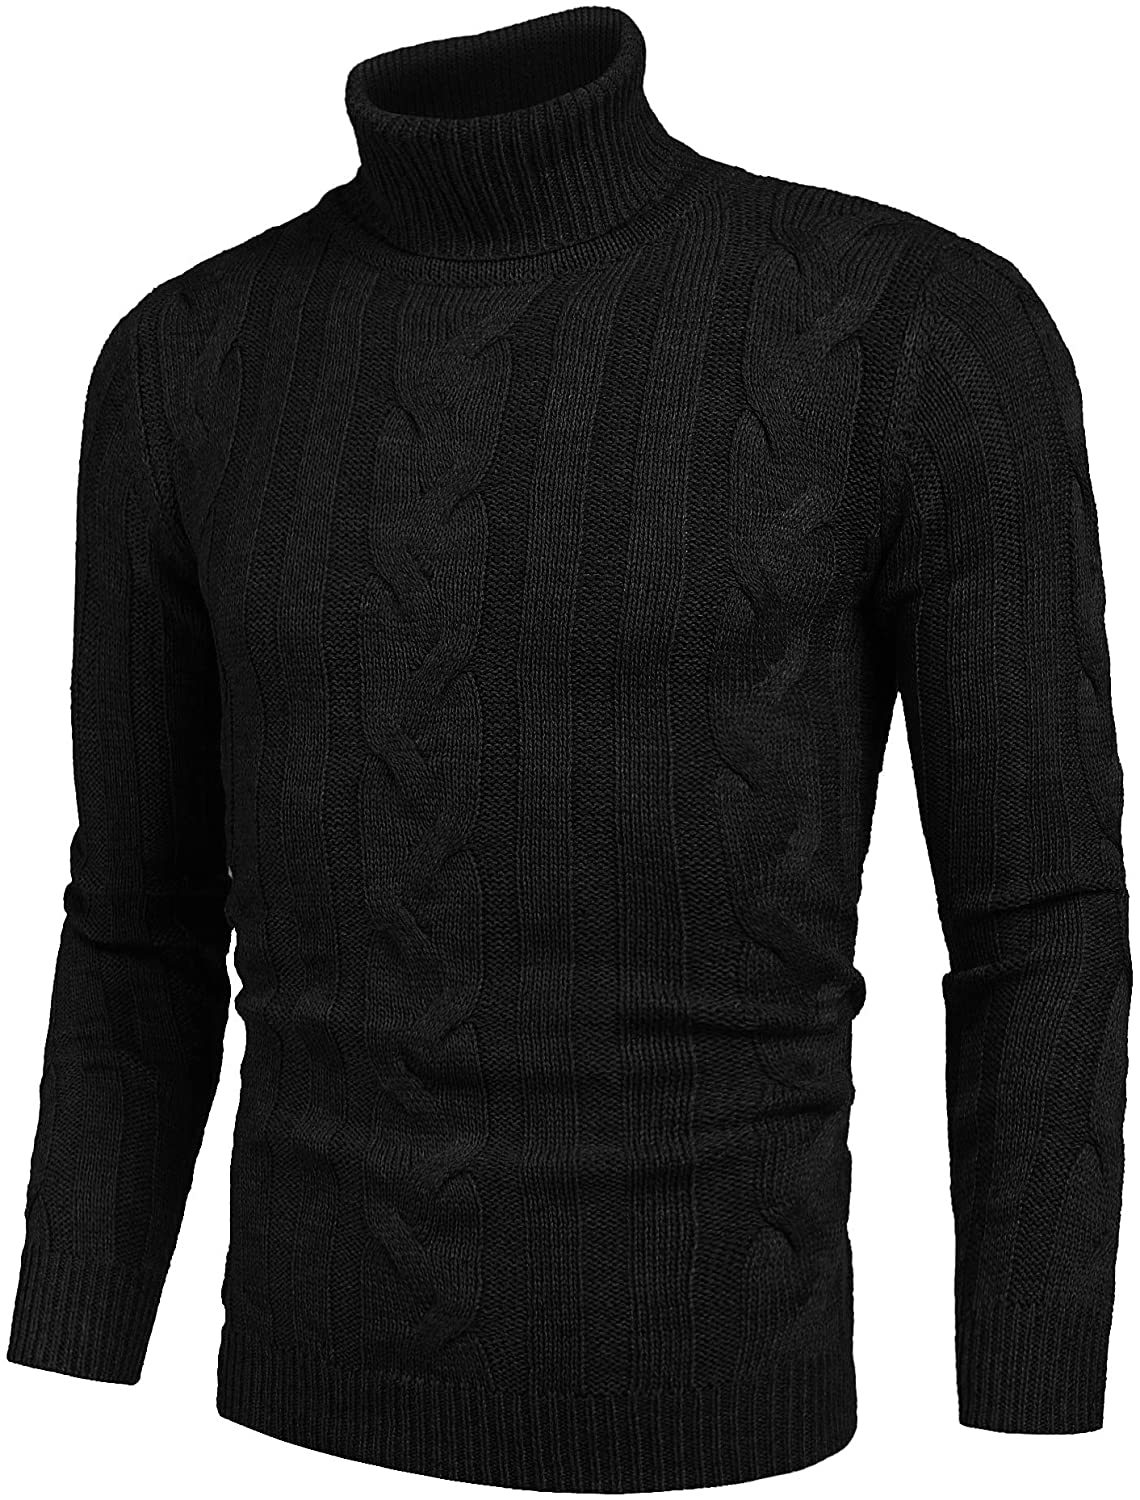 COOFANDY Men's Slim Fit Turtleneck Sweater Casual Ribbed Knitted ...